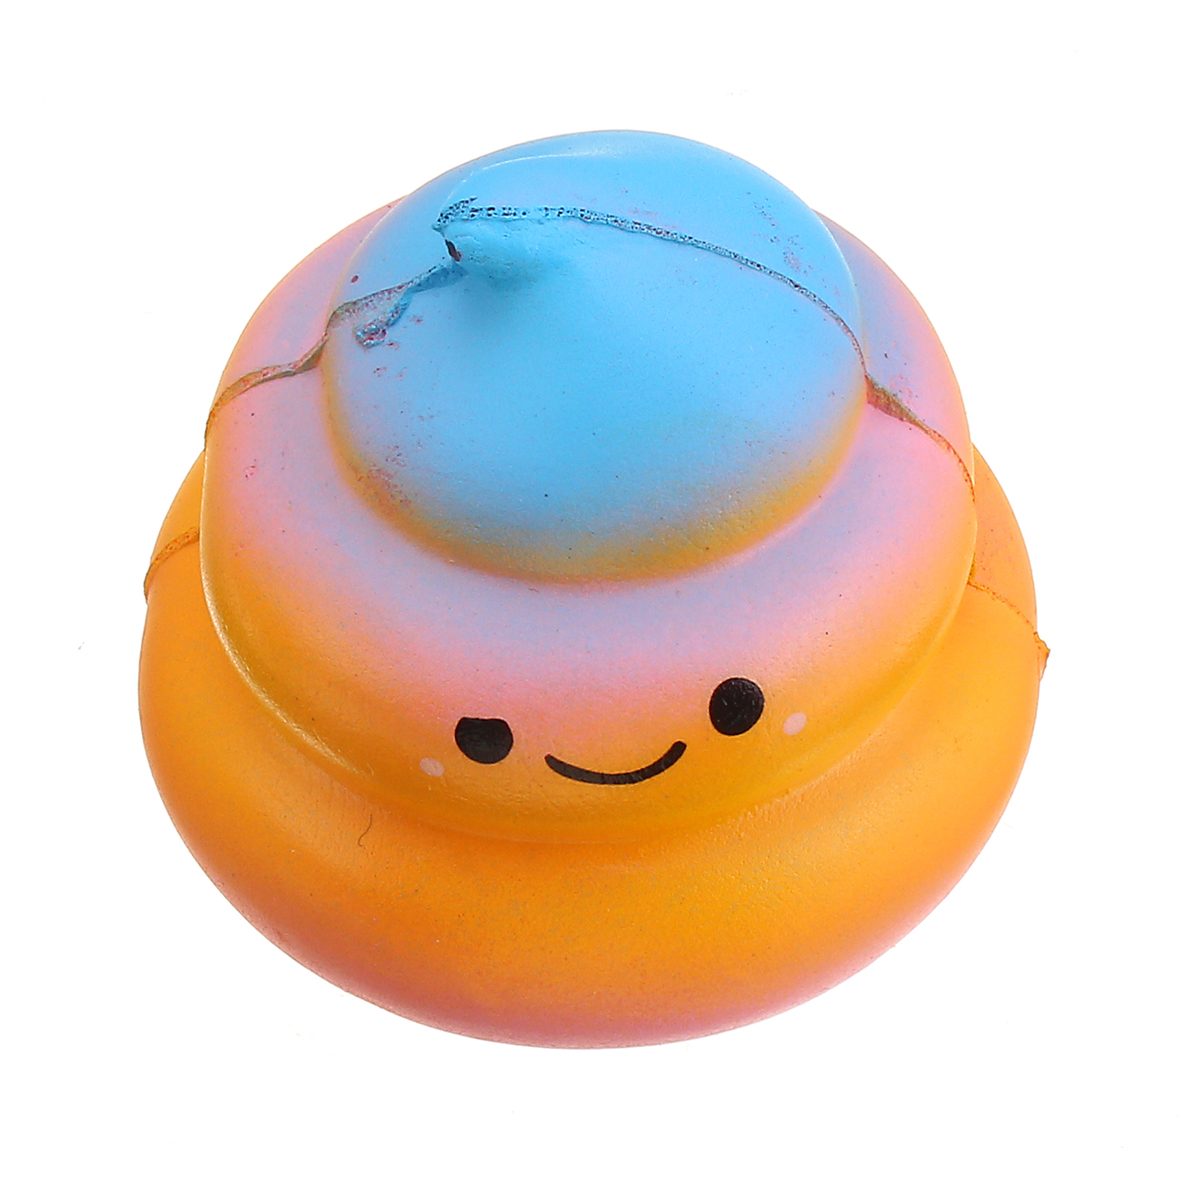 Squishy-Galaxy-Poo-Squishy-Hand-Pillow-65CM-Slow-Rising-With-Packaging-Collection-Gift-Decor-Toy-1311228-3